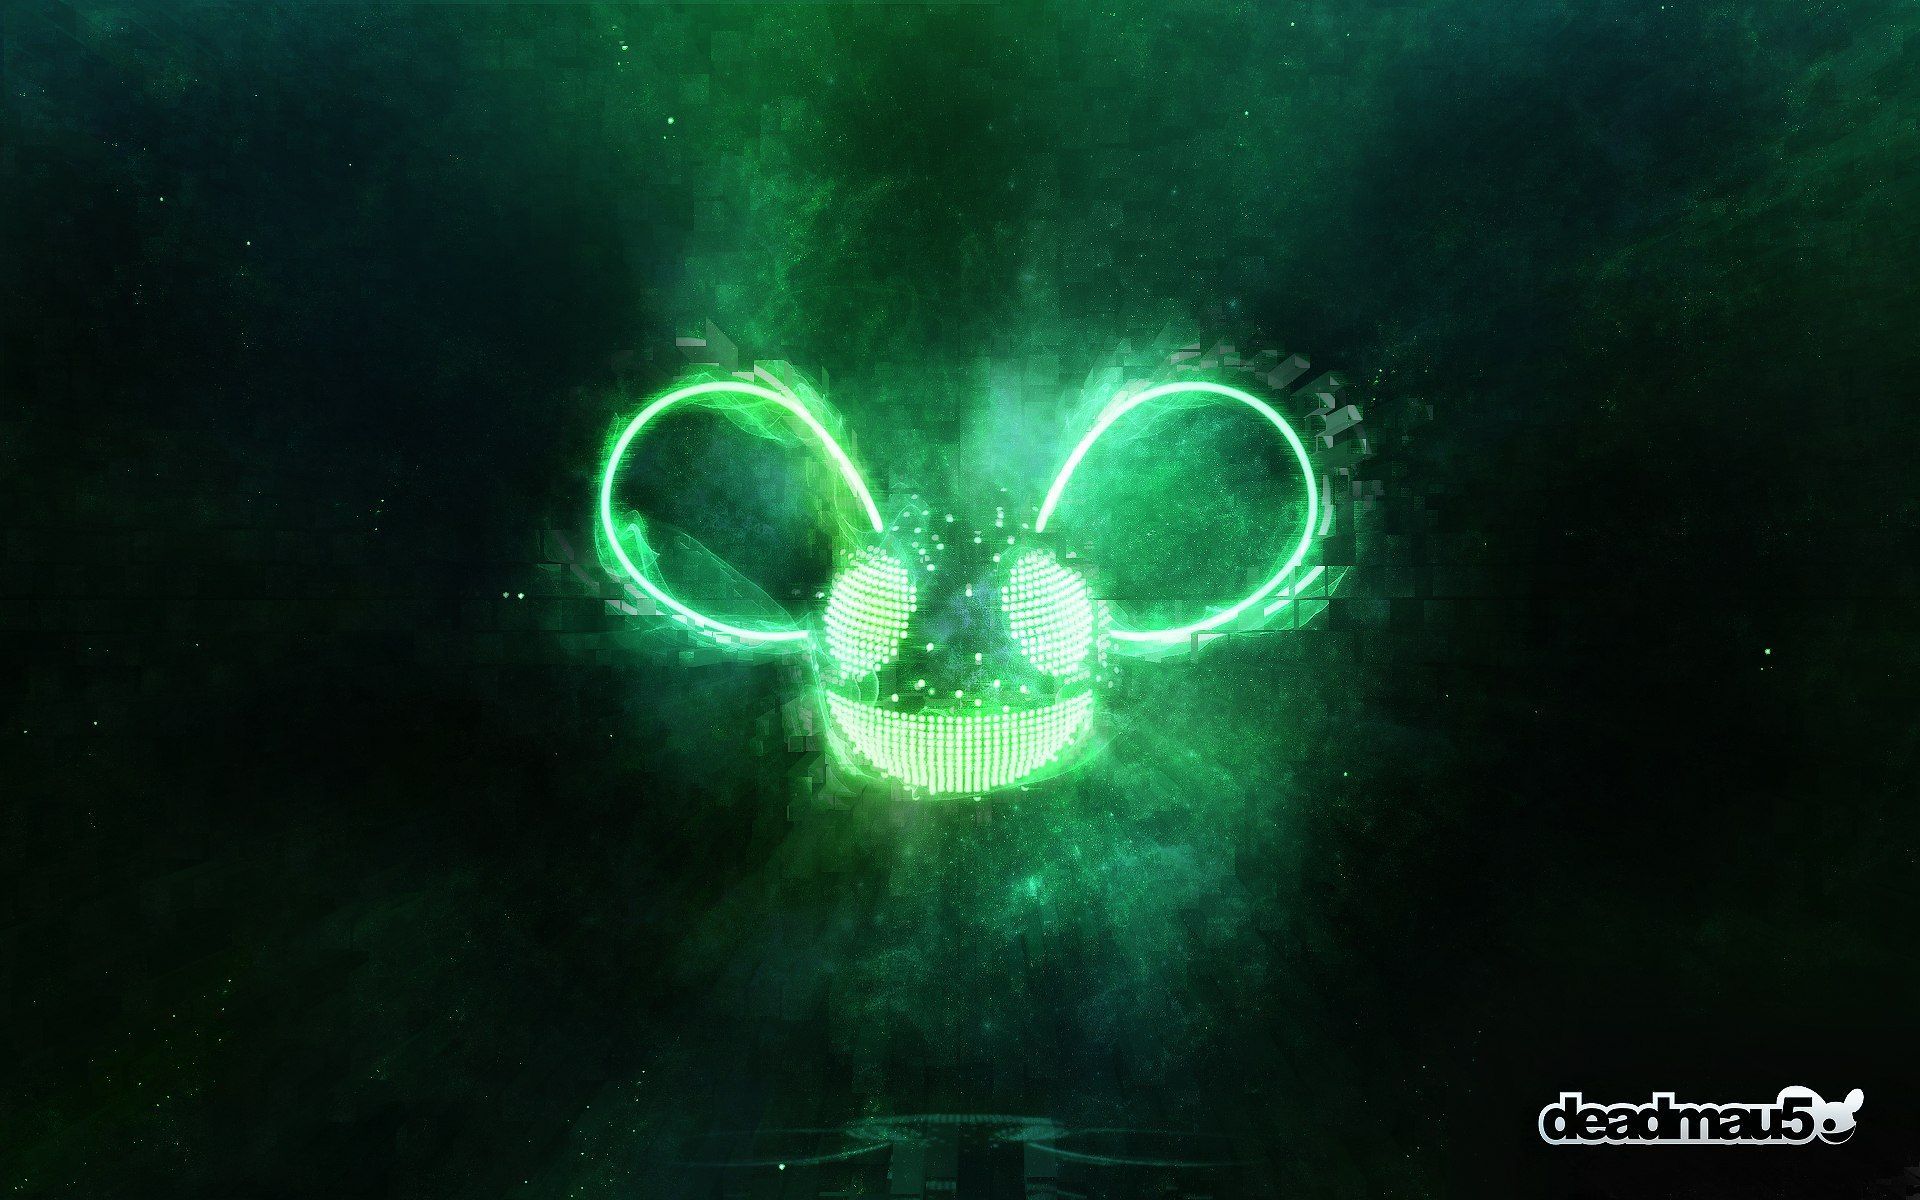 Deadmau5 wallpaper 1920x1200 - - High Quality and other